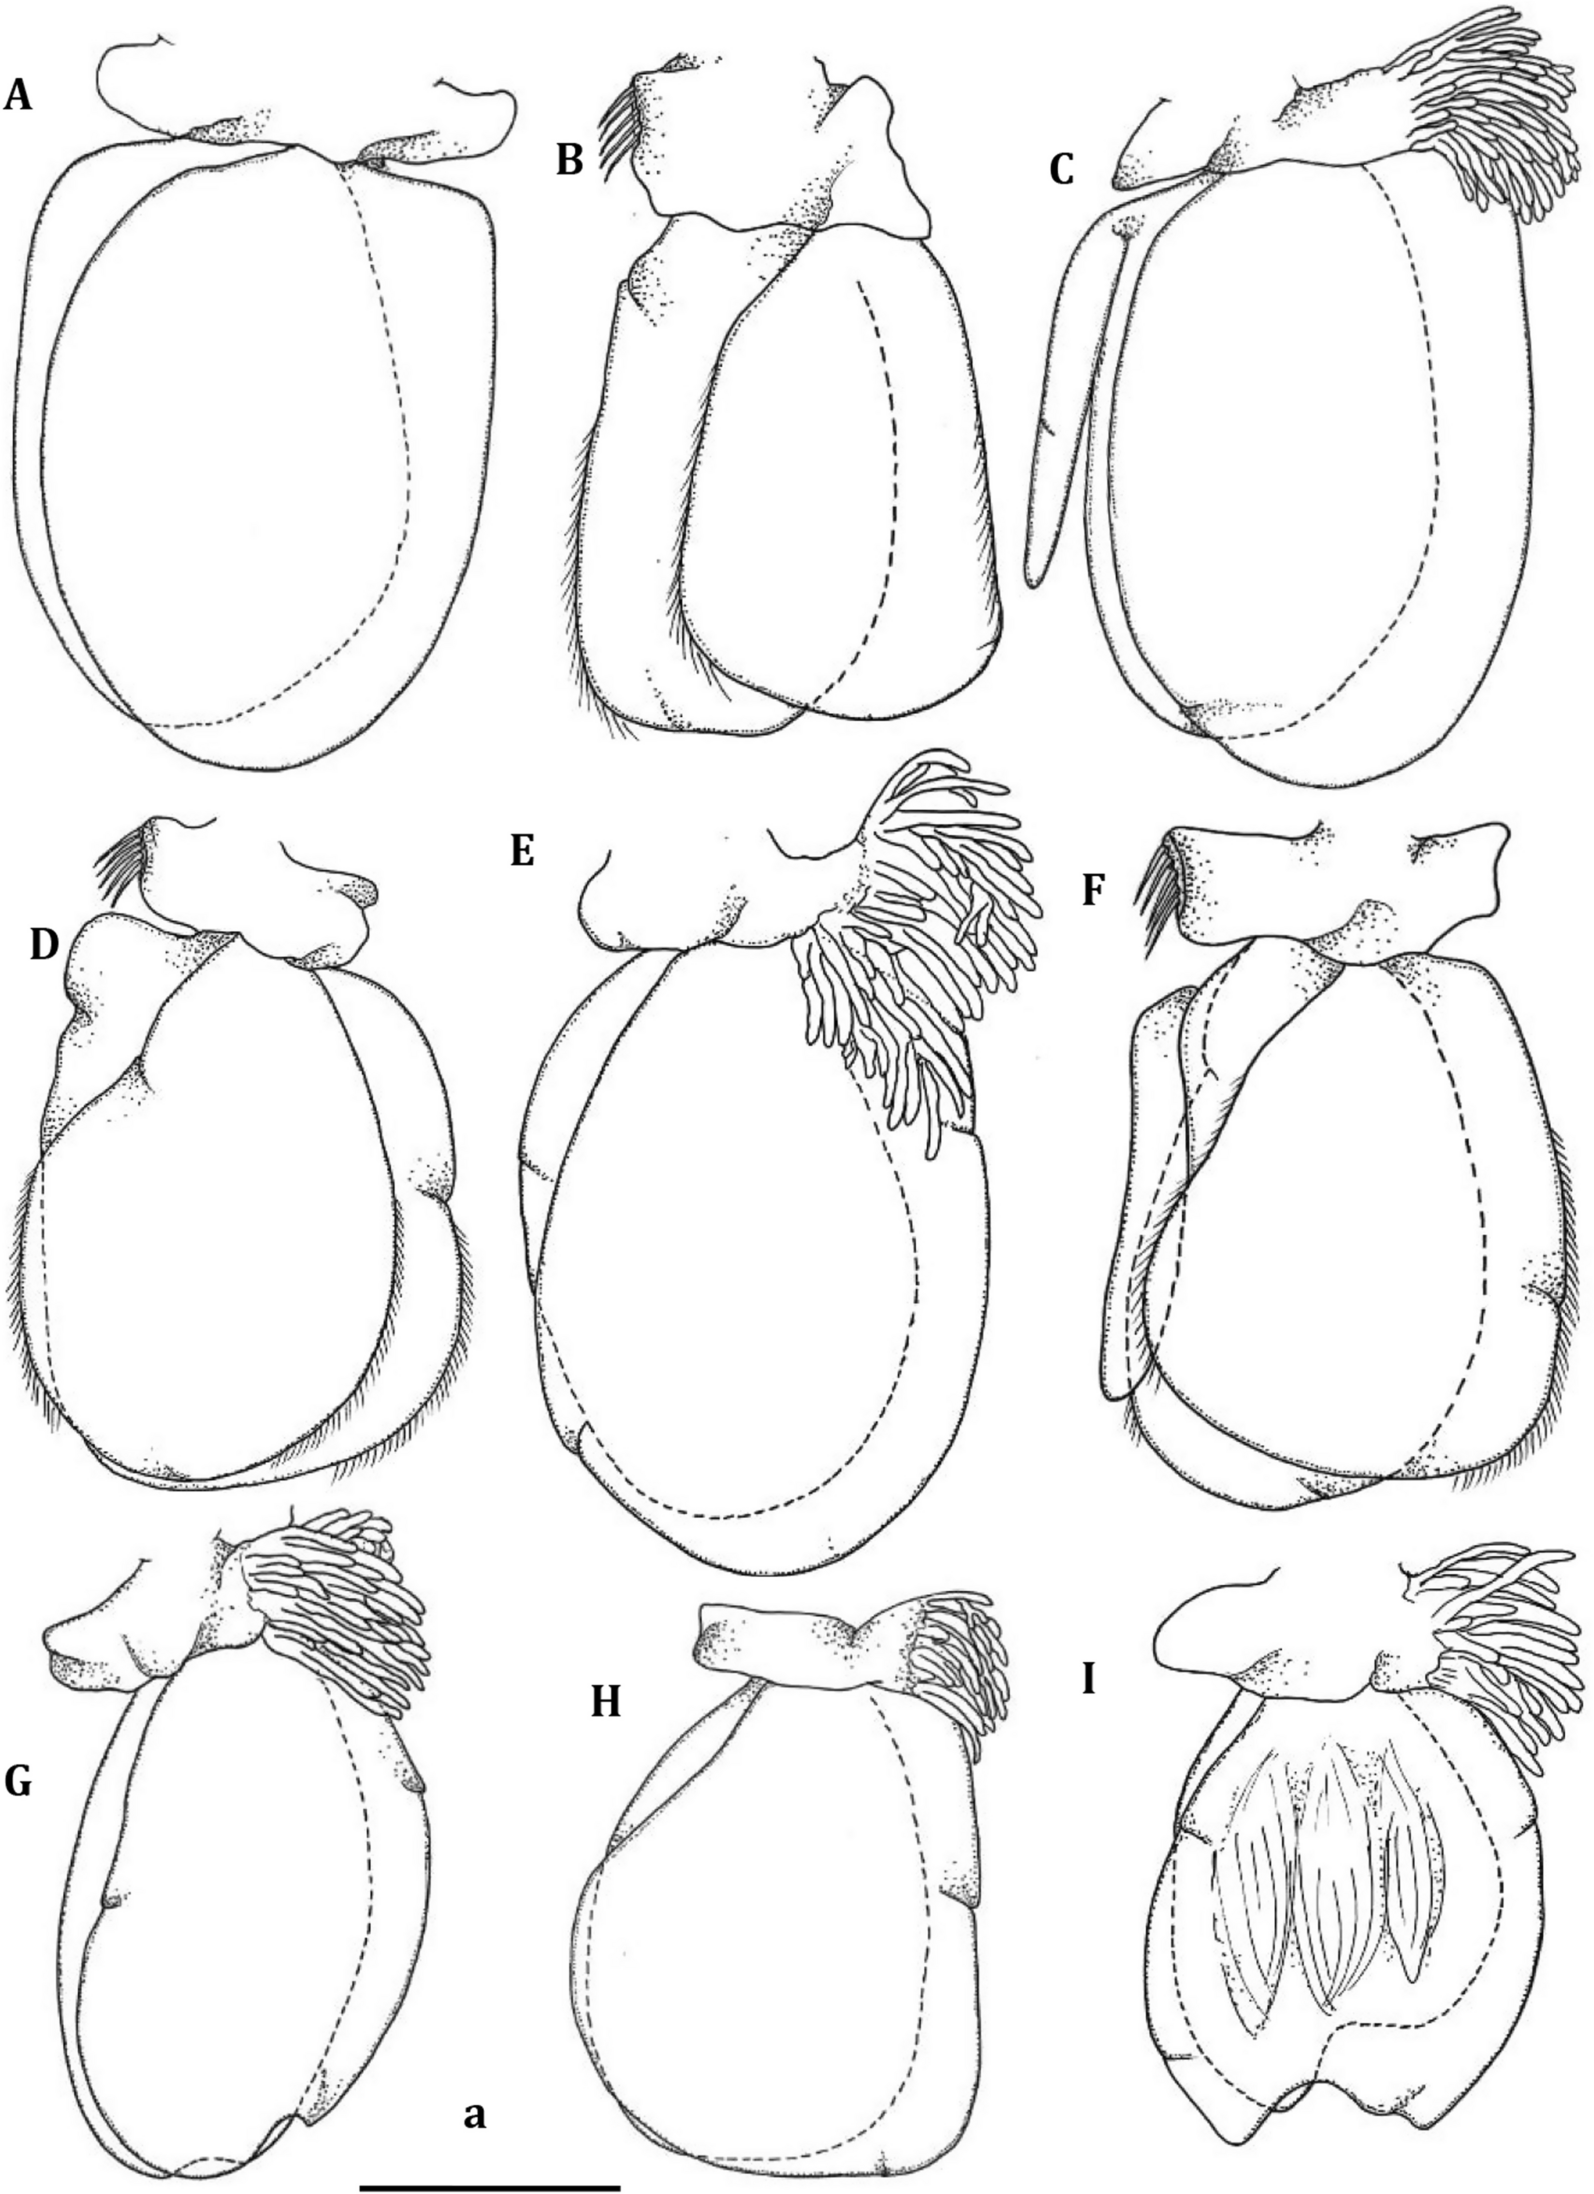 Fig. 6